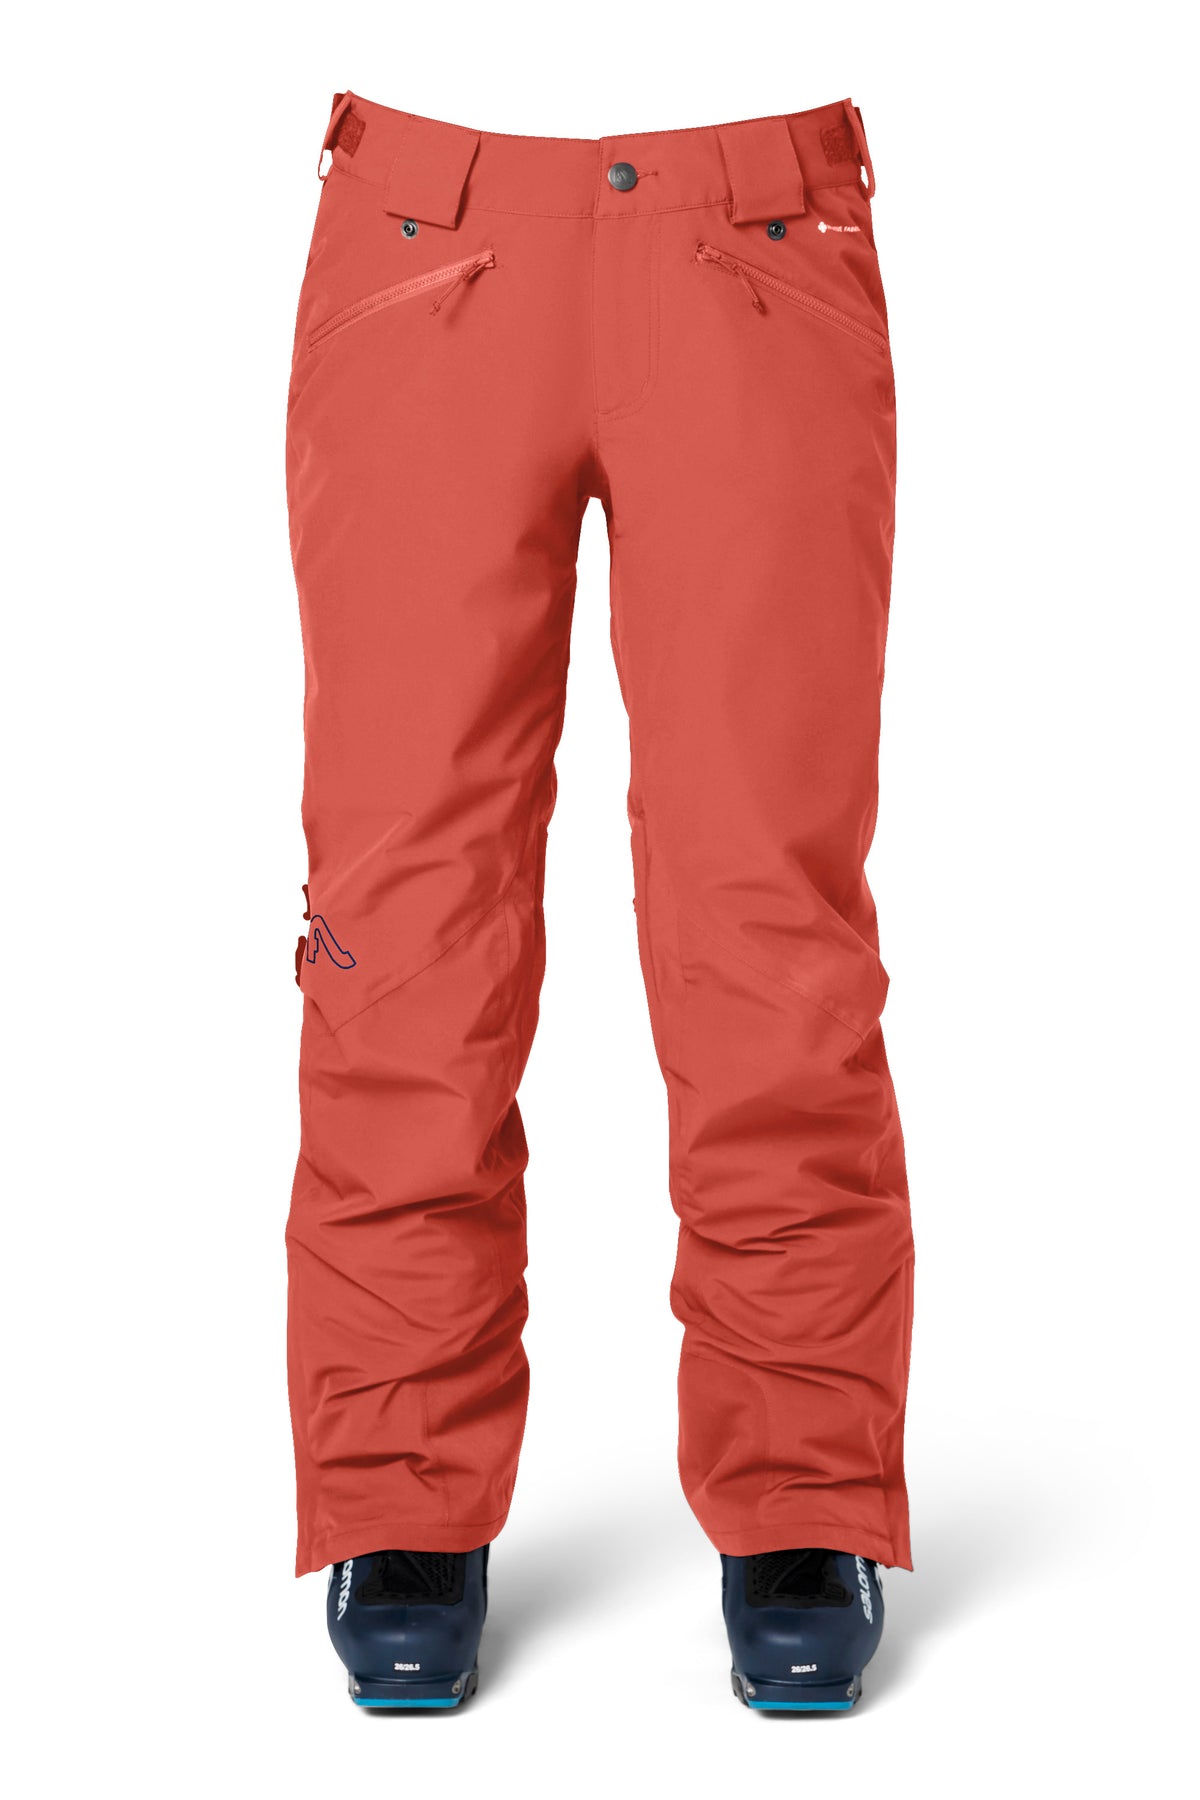 2022 Daisy Insulated Pant - Now On Sale